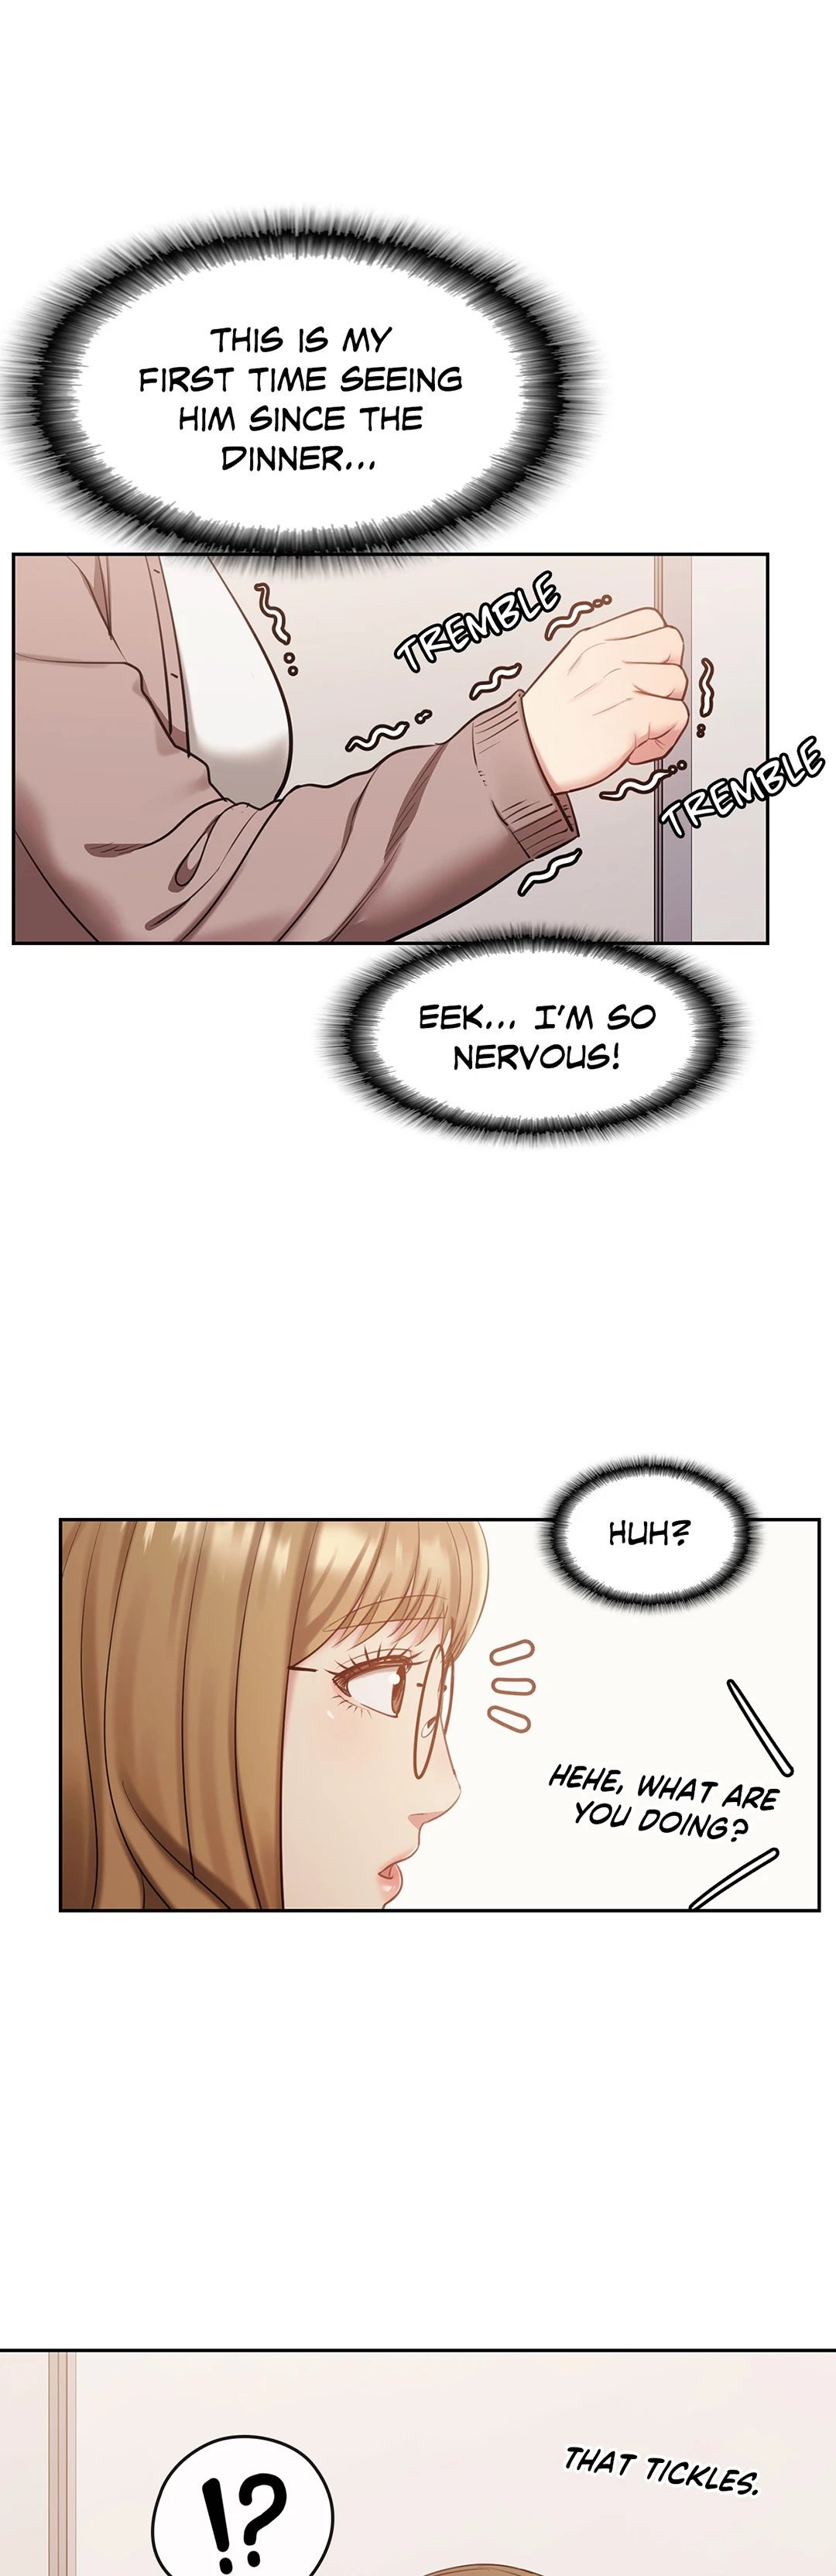 sexual-consulting-chap-34-1